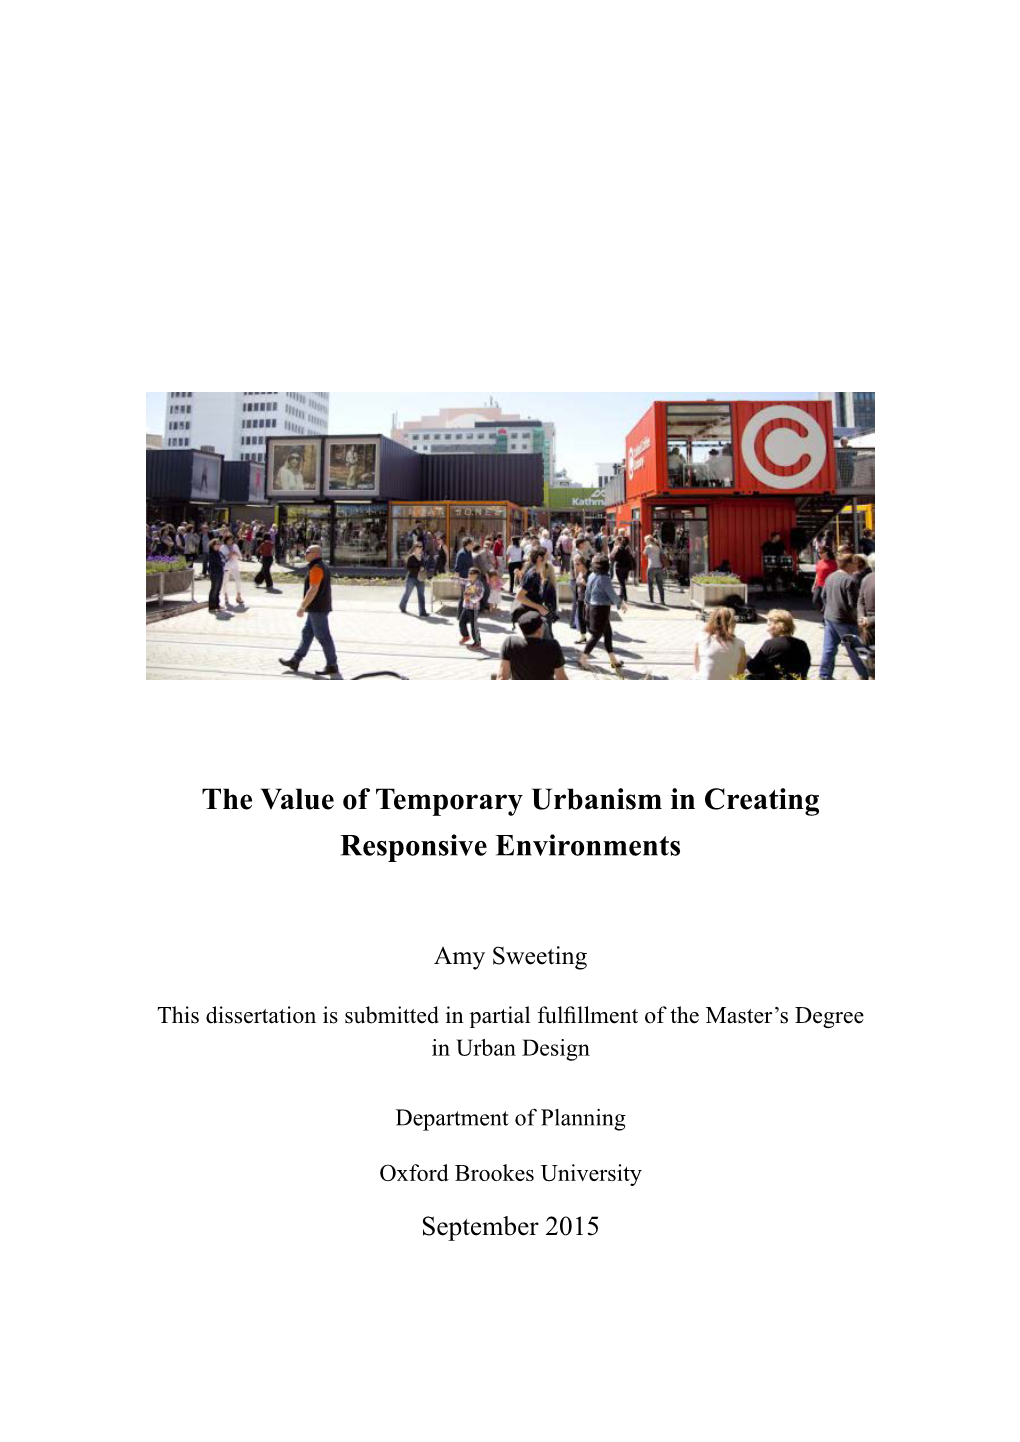 The Value of Temporary Urbanism in Creating Responsive Environments